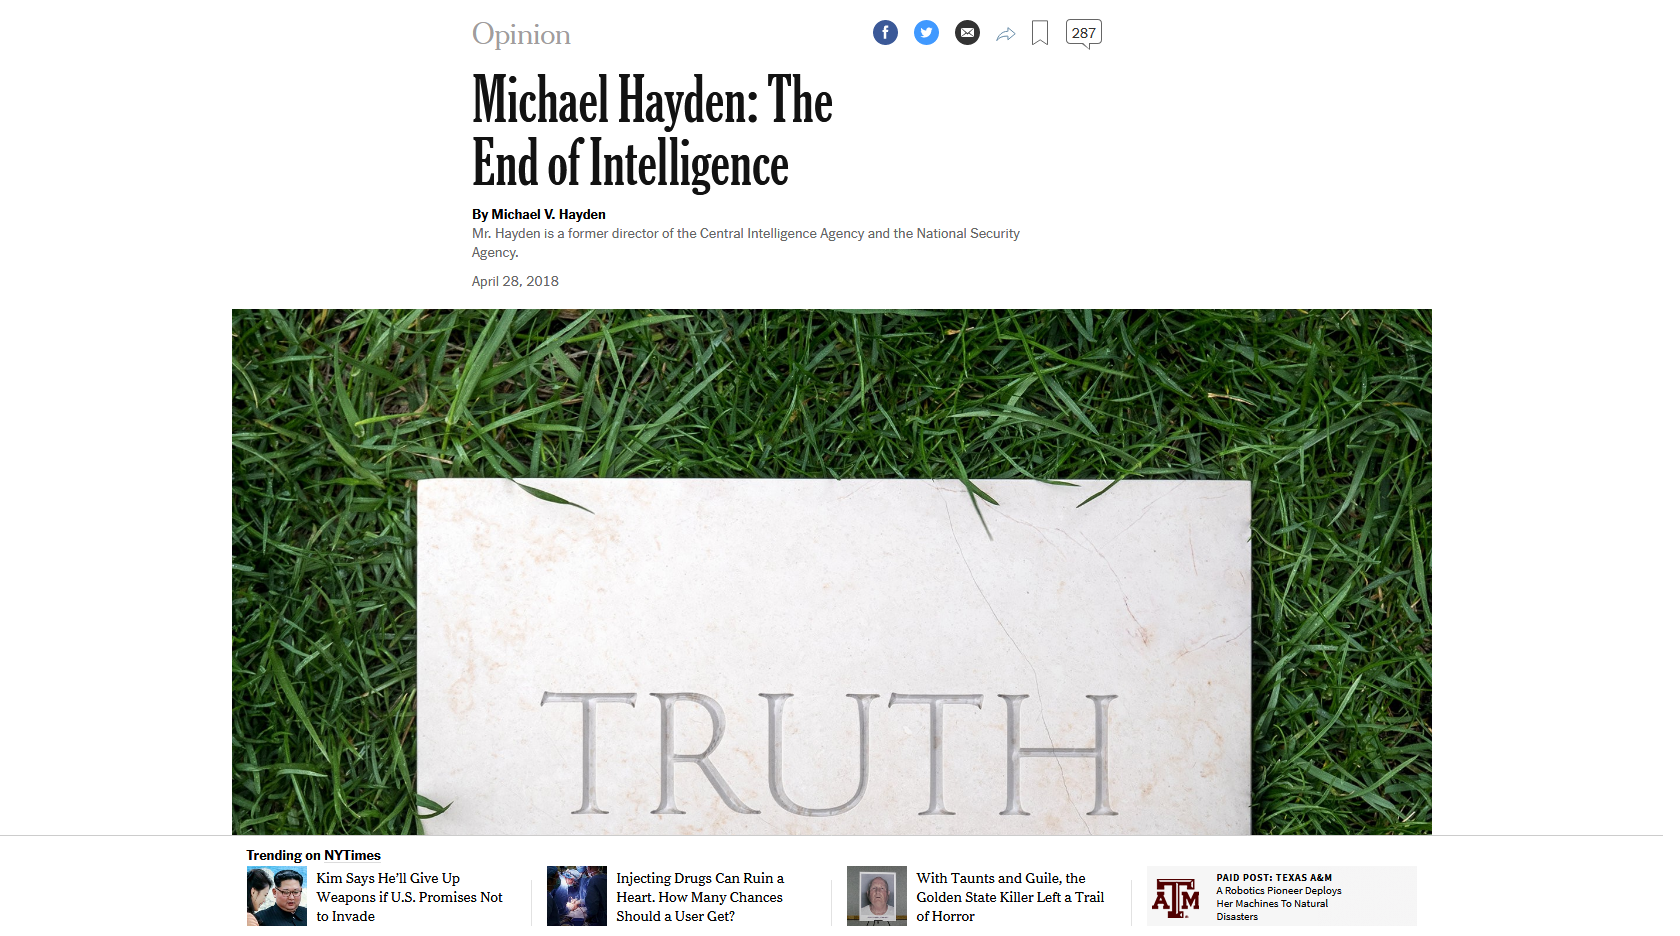 Screenshot-2018-4-29 Opinion Michael Hayden The End of Intelligence.png